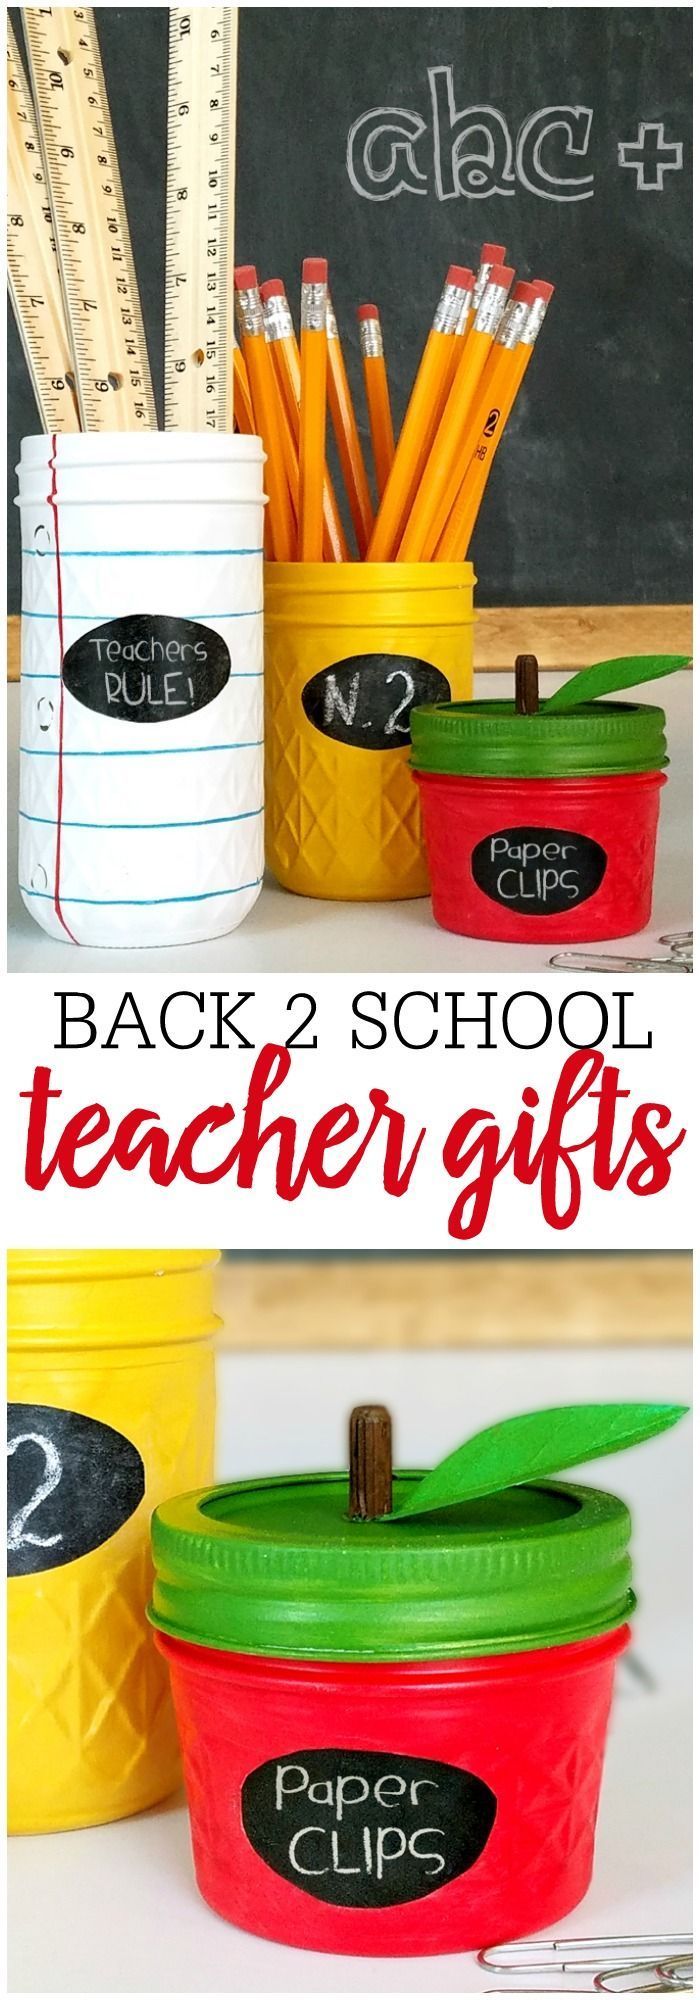 Mason Jar Teacher Gift Idea - a simple and cute DIY project that will make for a...